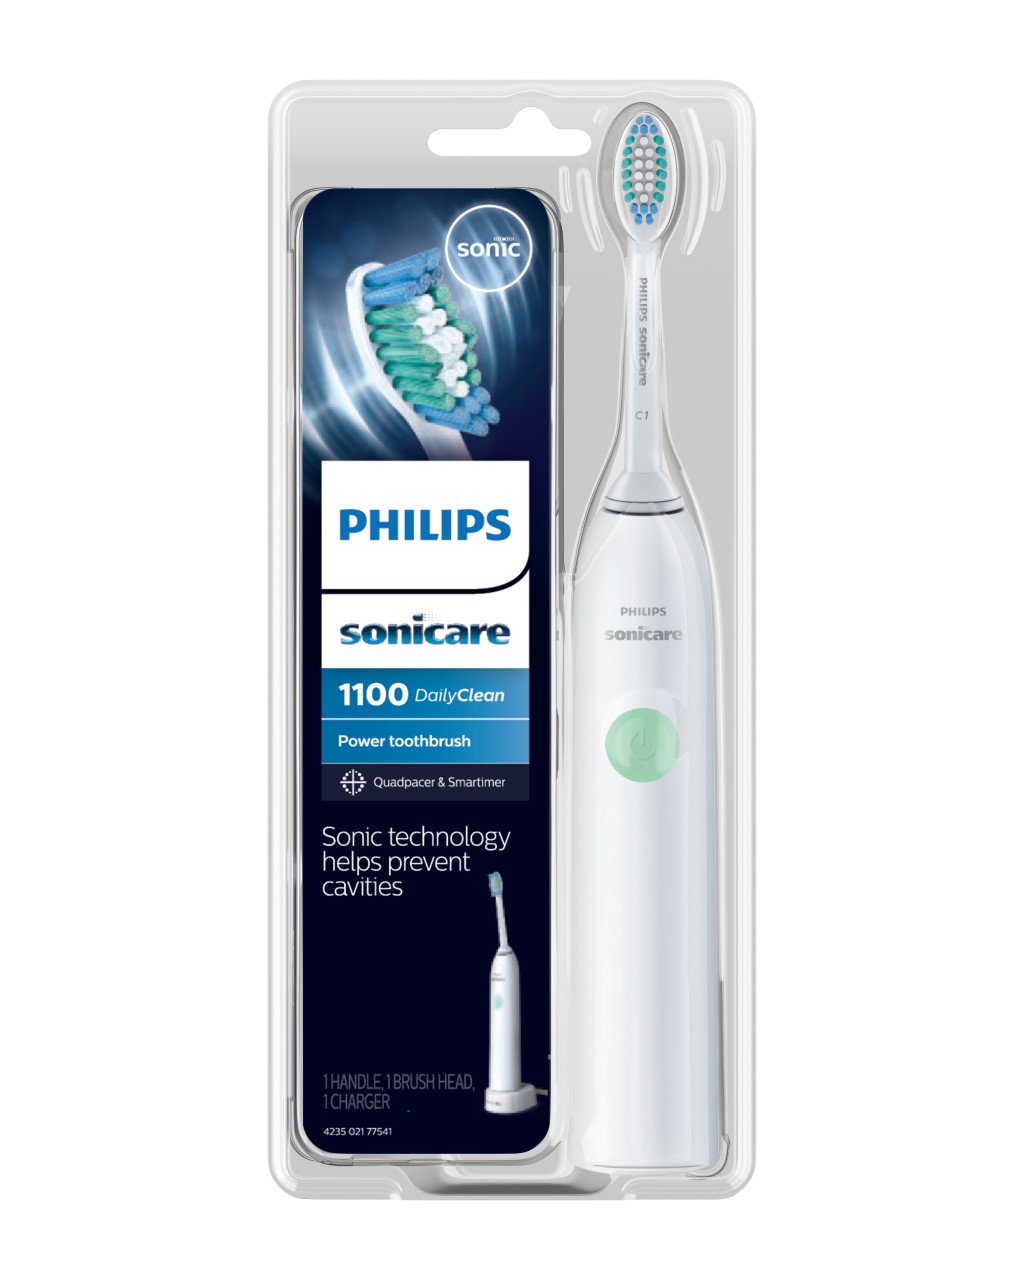 Philips Sonicare Dailyclean 1100 Rechargeable Electric Toothbrush, White HX3411/05 - image 1 of 10